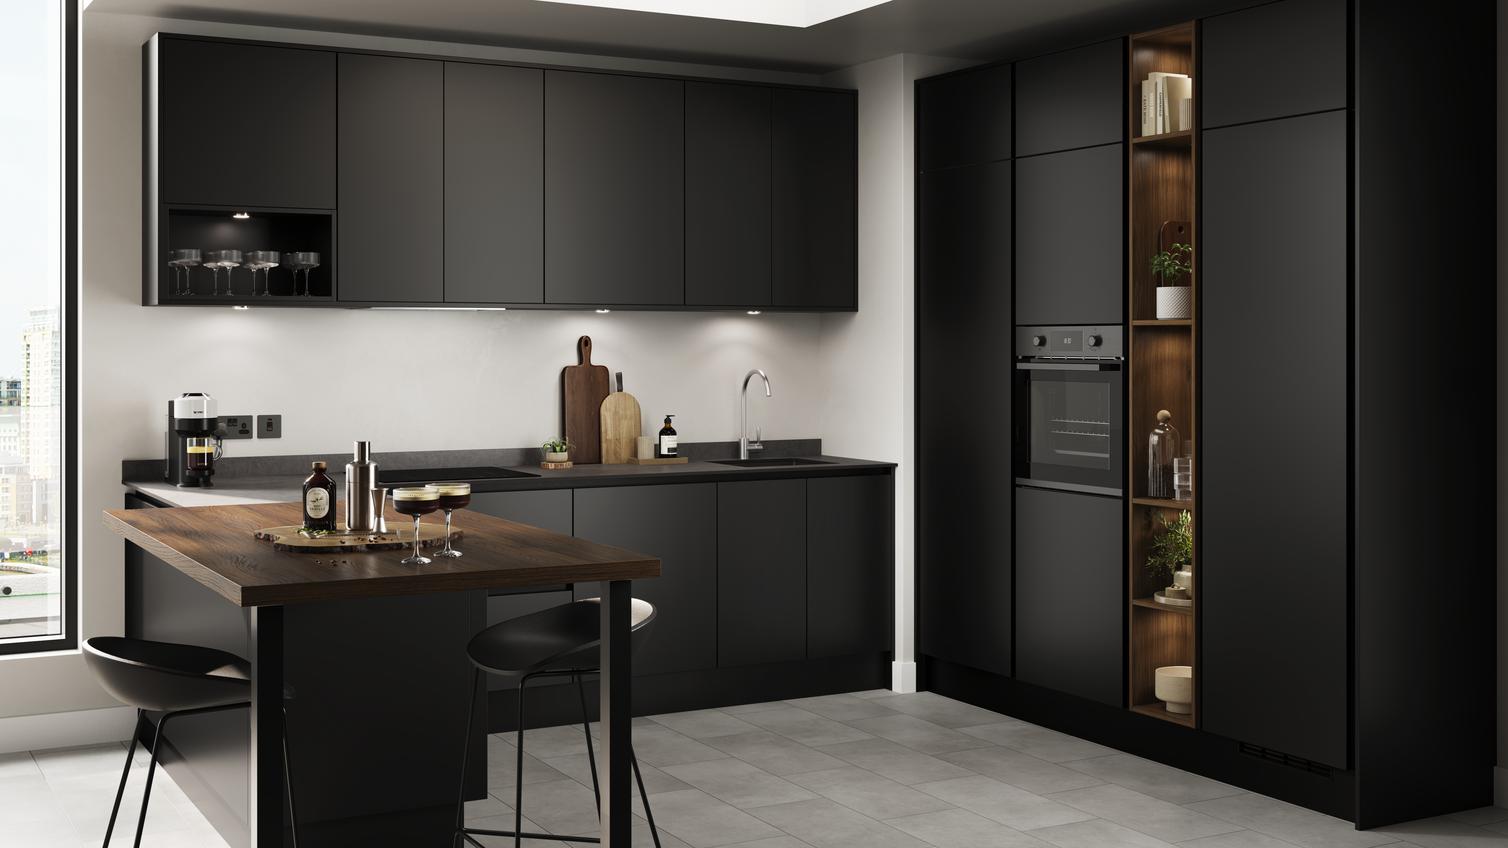 A kitchen with black cabinets and matching counter tops, including a dark wood-effect breakfast bar.